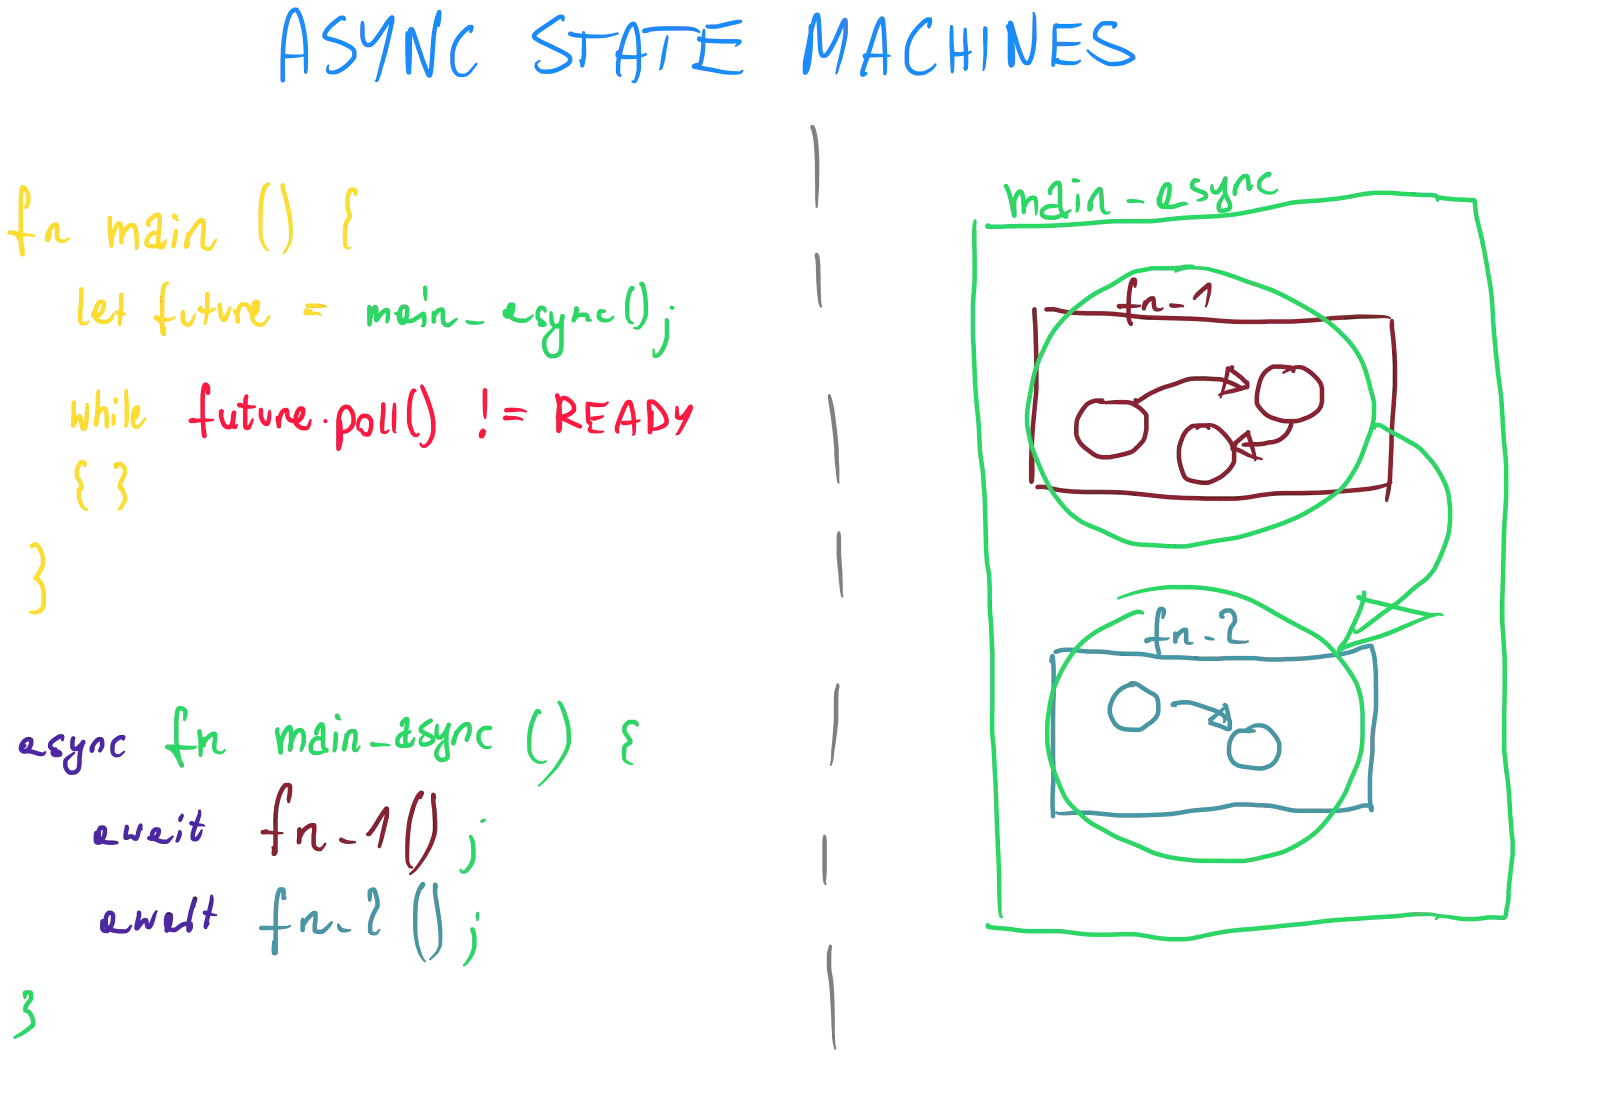 State Machines in async functions